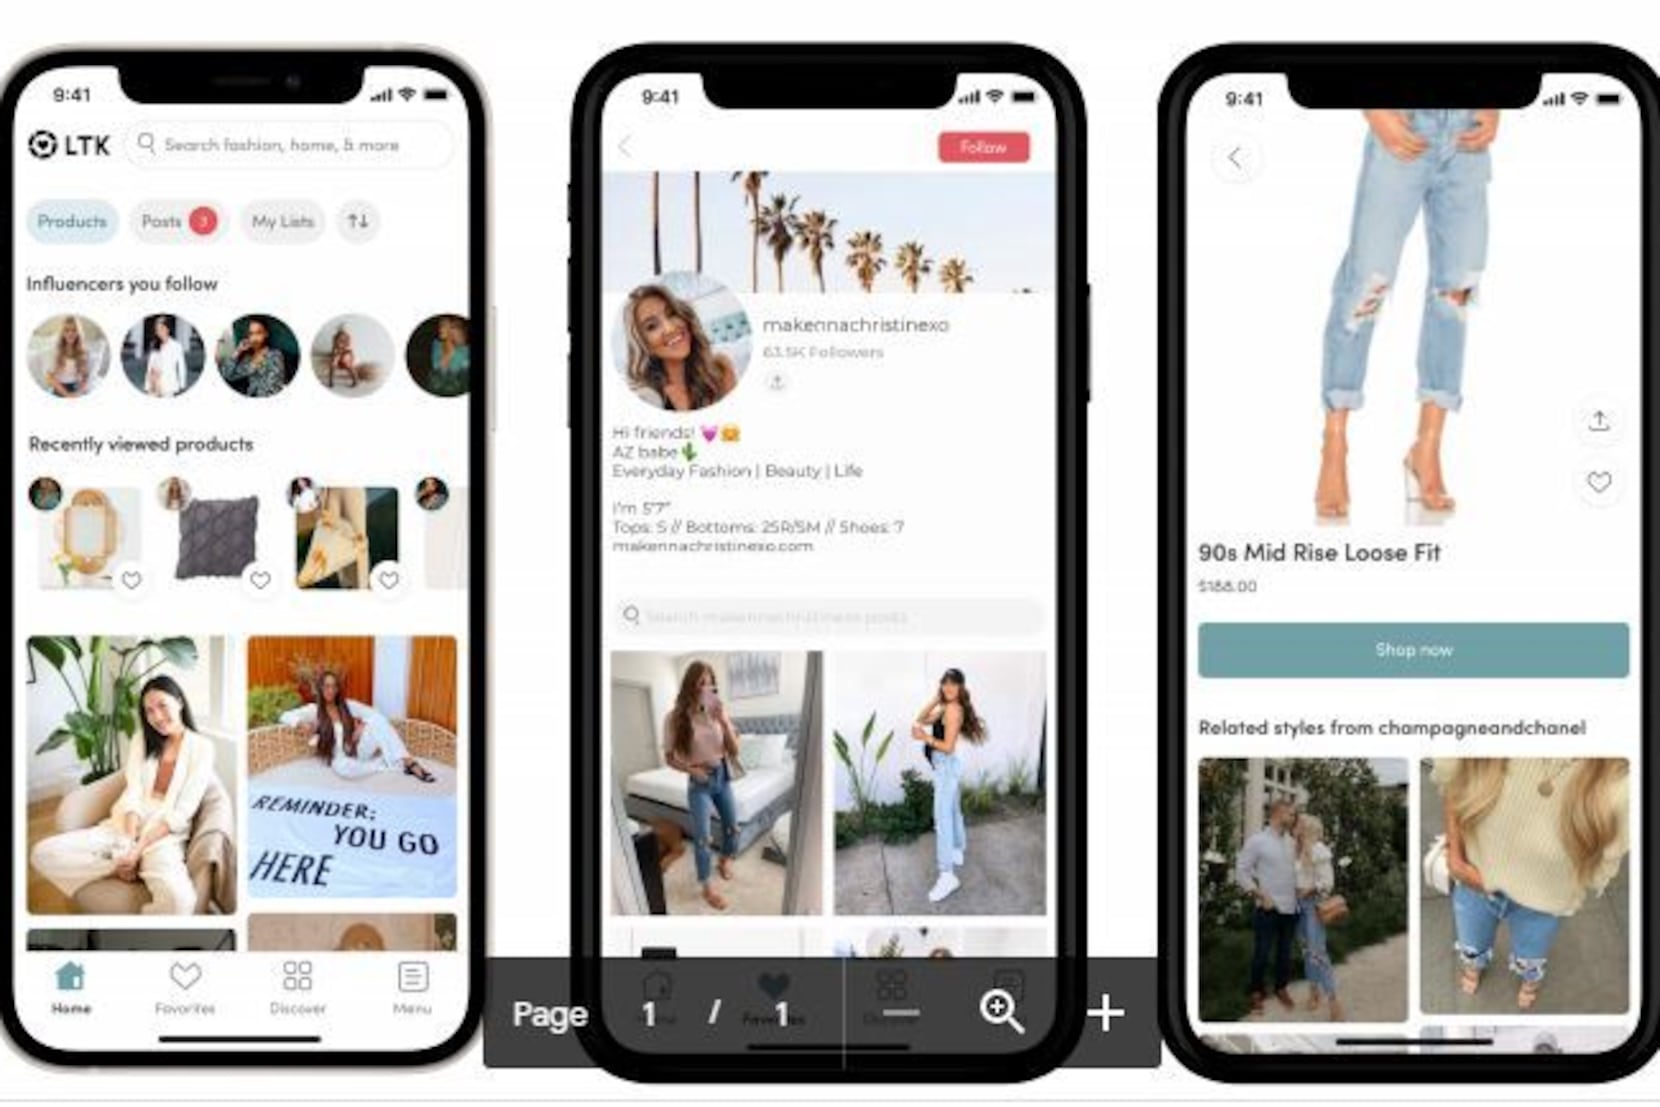 Influencer shopping app LTK adds creator product reviews in its